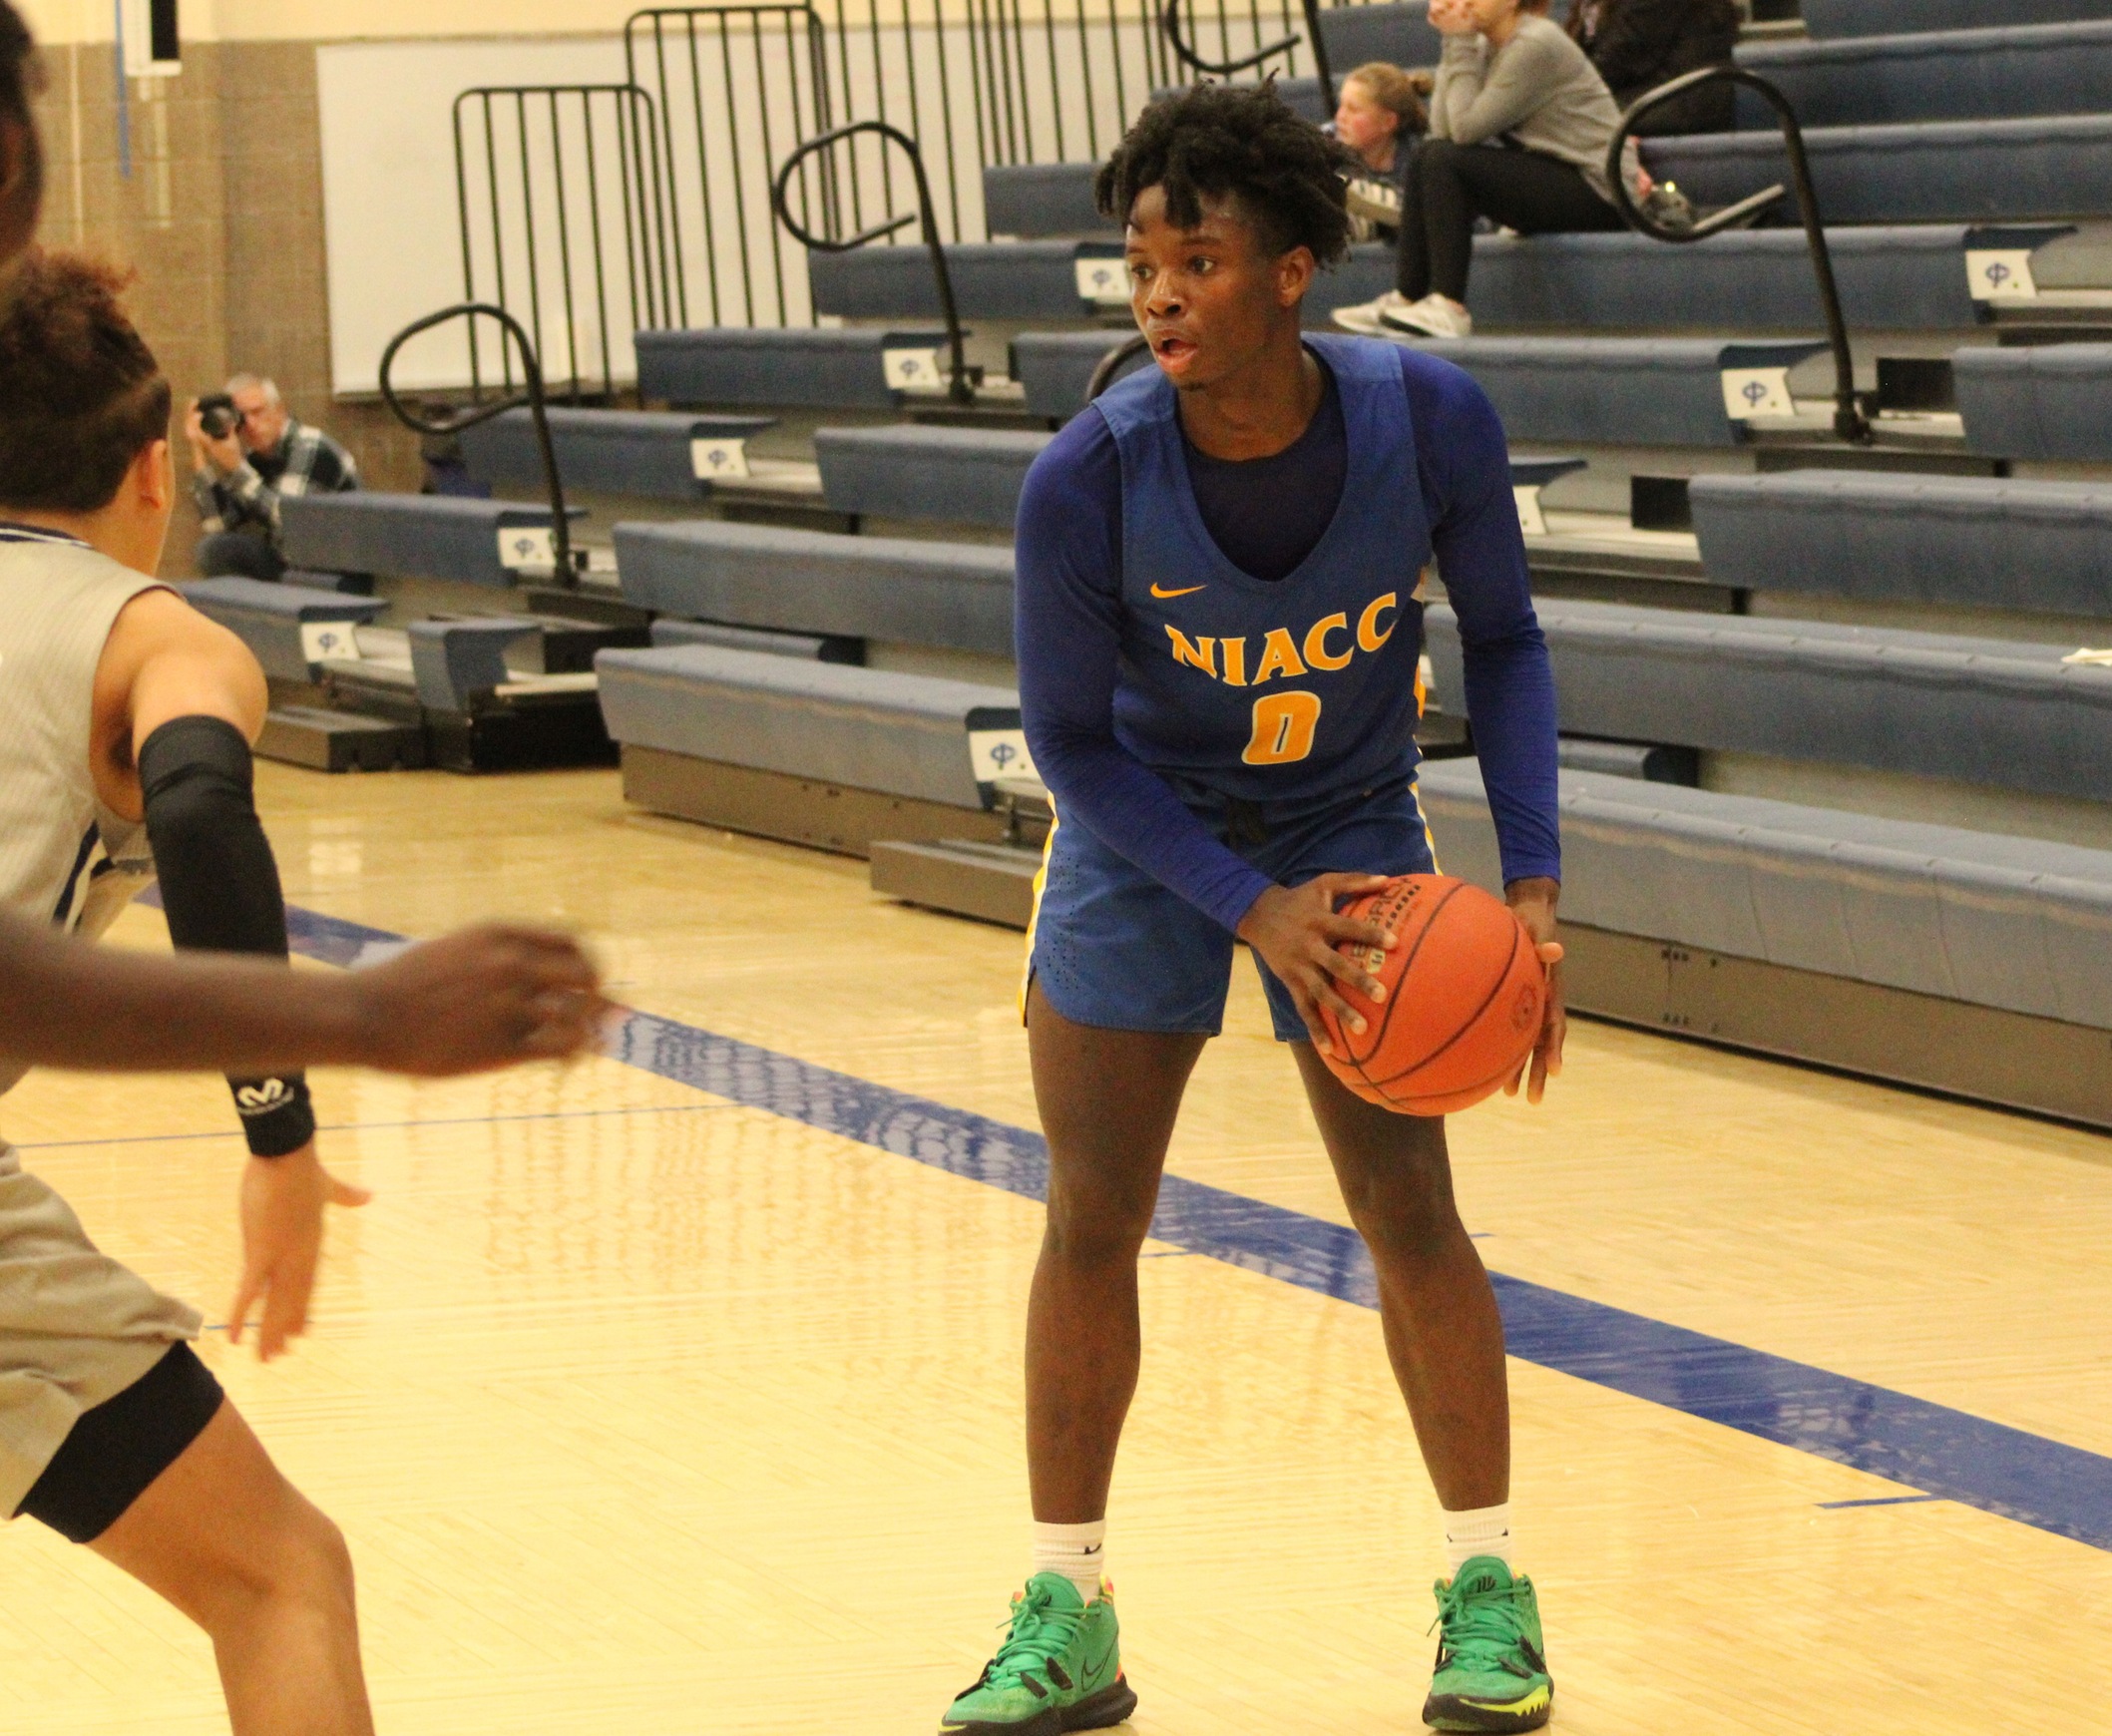 NIACC's Myles Tucker looks to drive to the basket in the second half of Wednesday's game at Iowa Central.